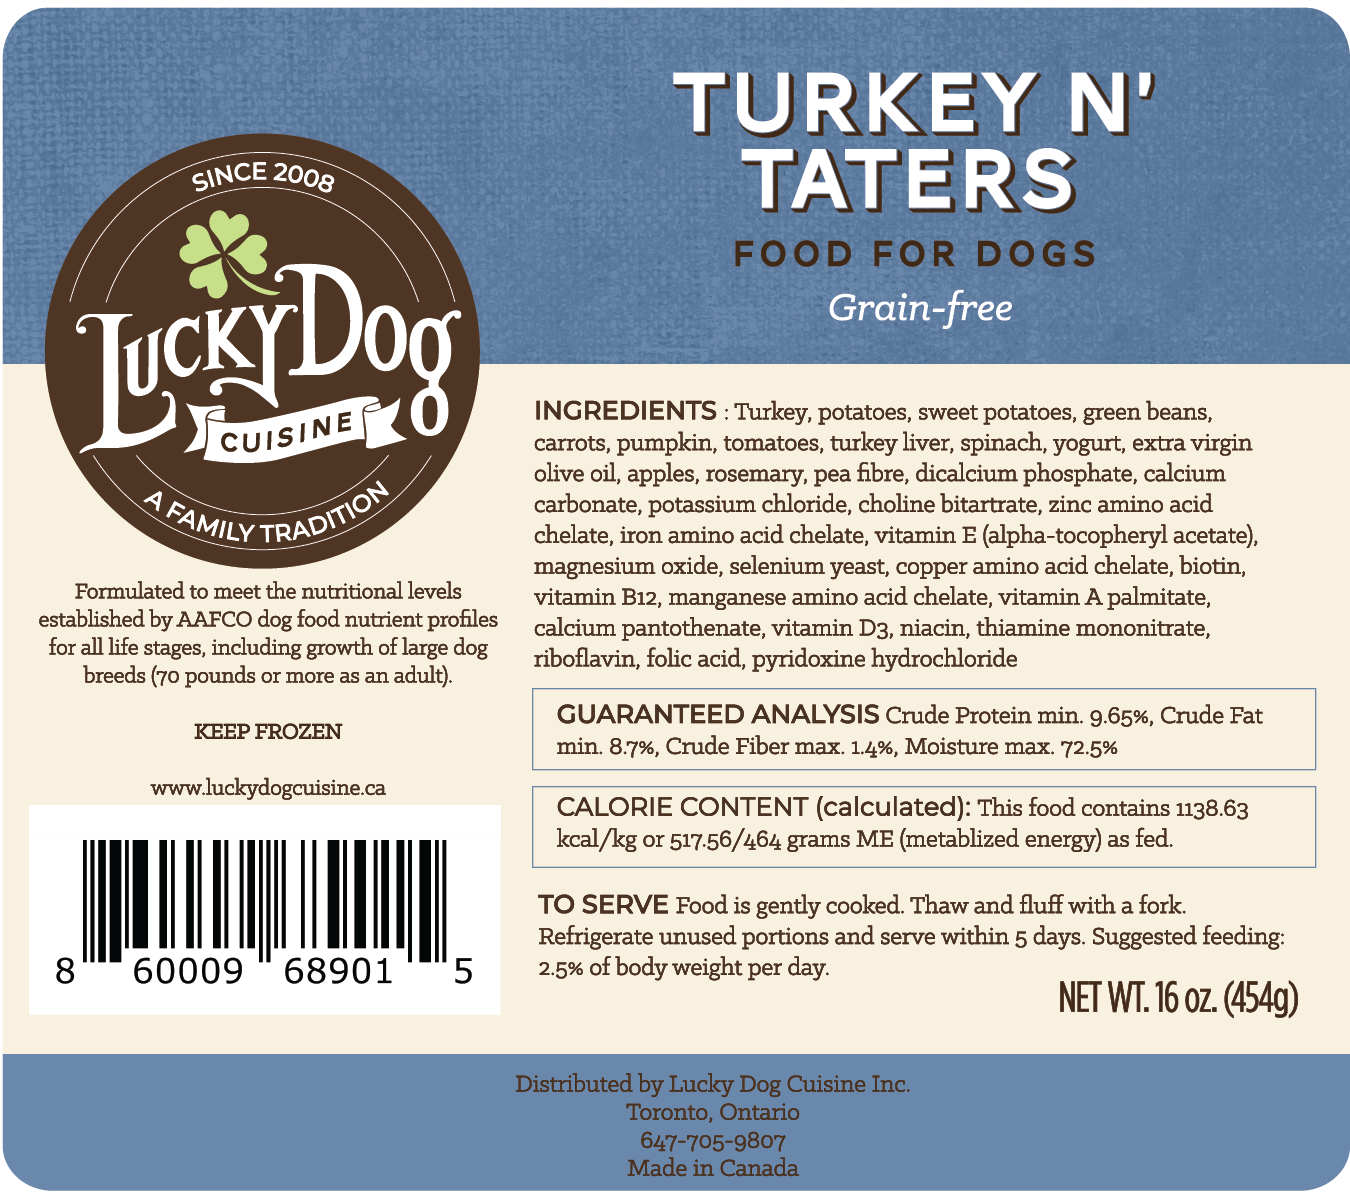 Turkey and taters recipe label with full ingredient list and guaranteed analysis